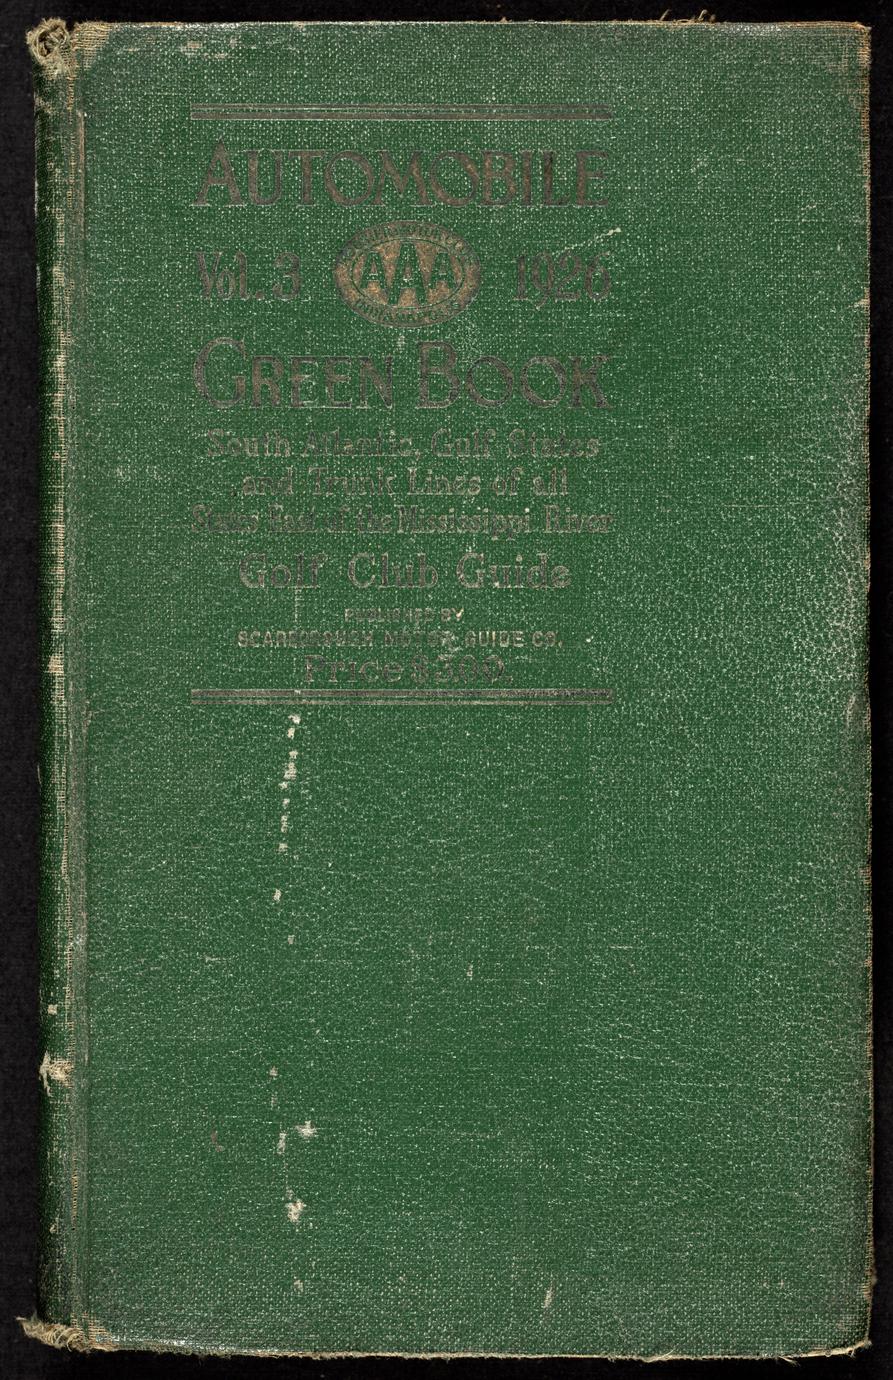 The Automobile green book (1 of 3)